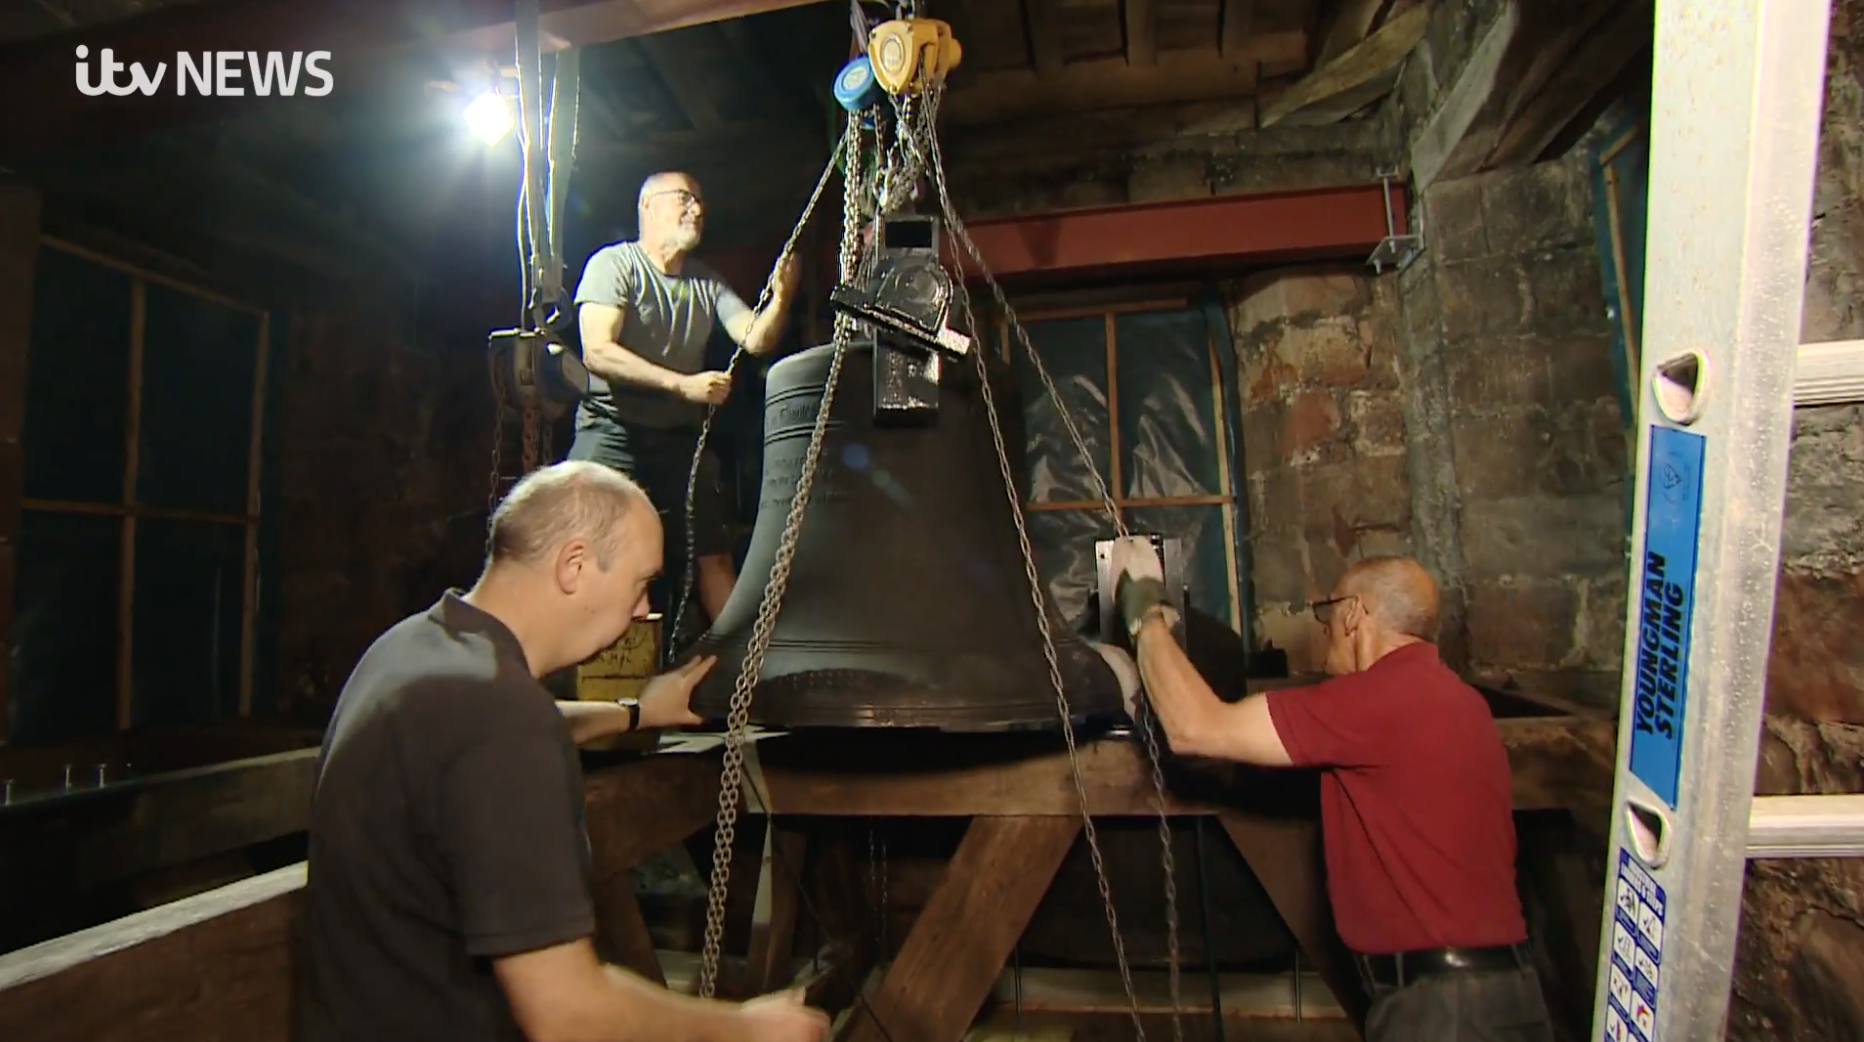 Heaviest set of church bells in the world set for restoration